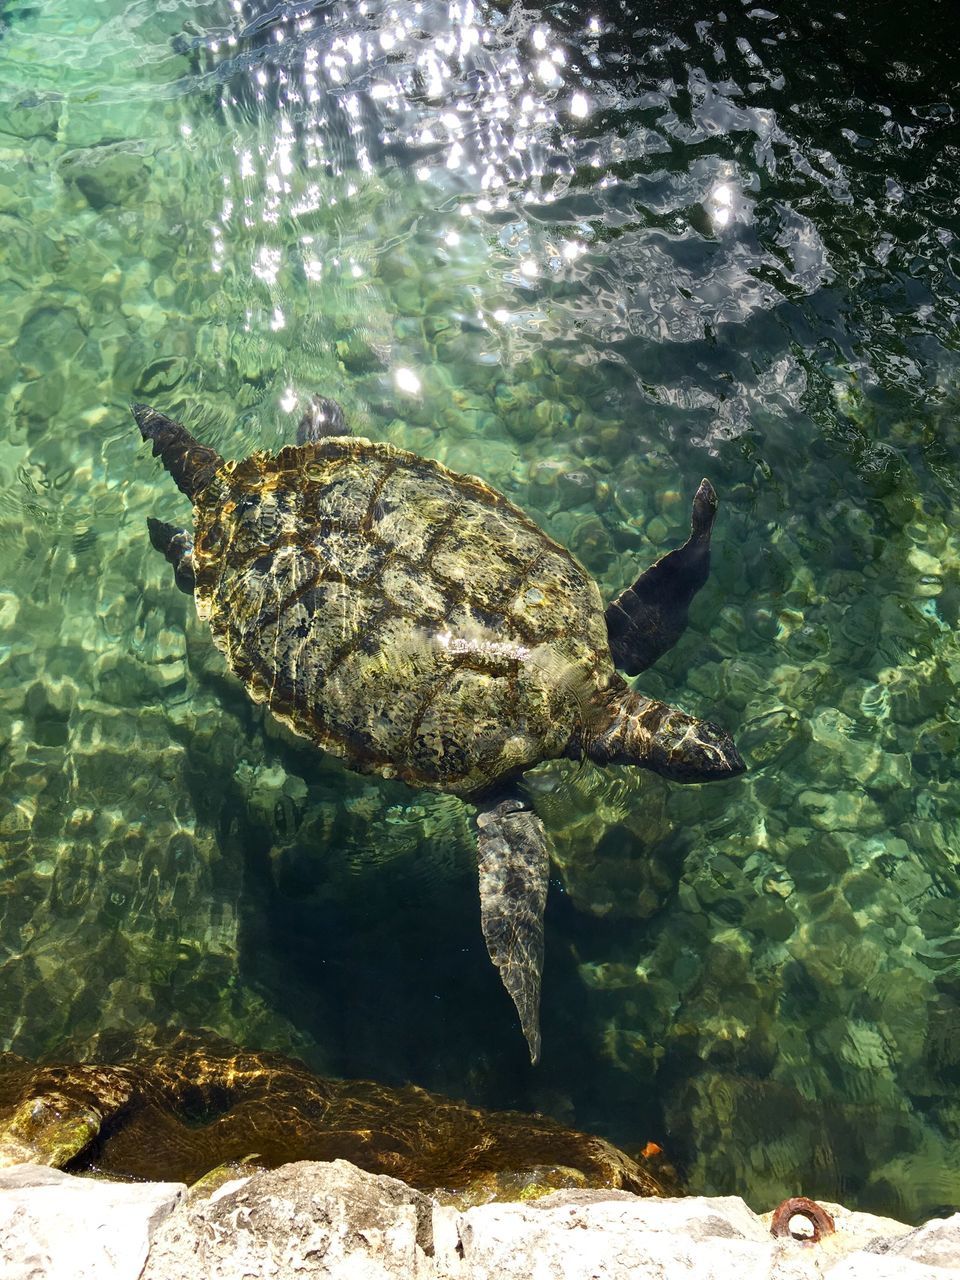 underwater, sea, animals in the wild, swimming, animal themes, water, undersea, sea life, one animal, no people, nature, beauty in nature, outdoors, day, sea turtle